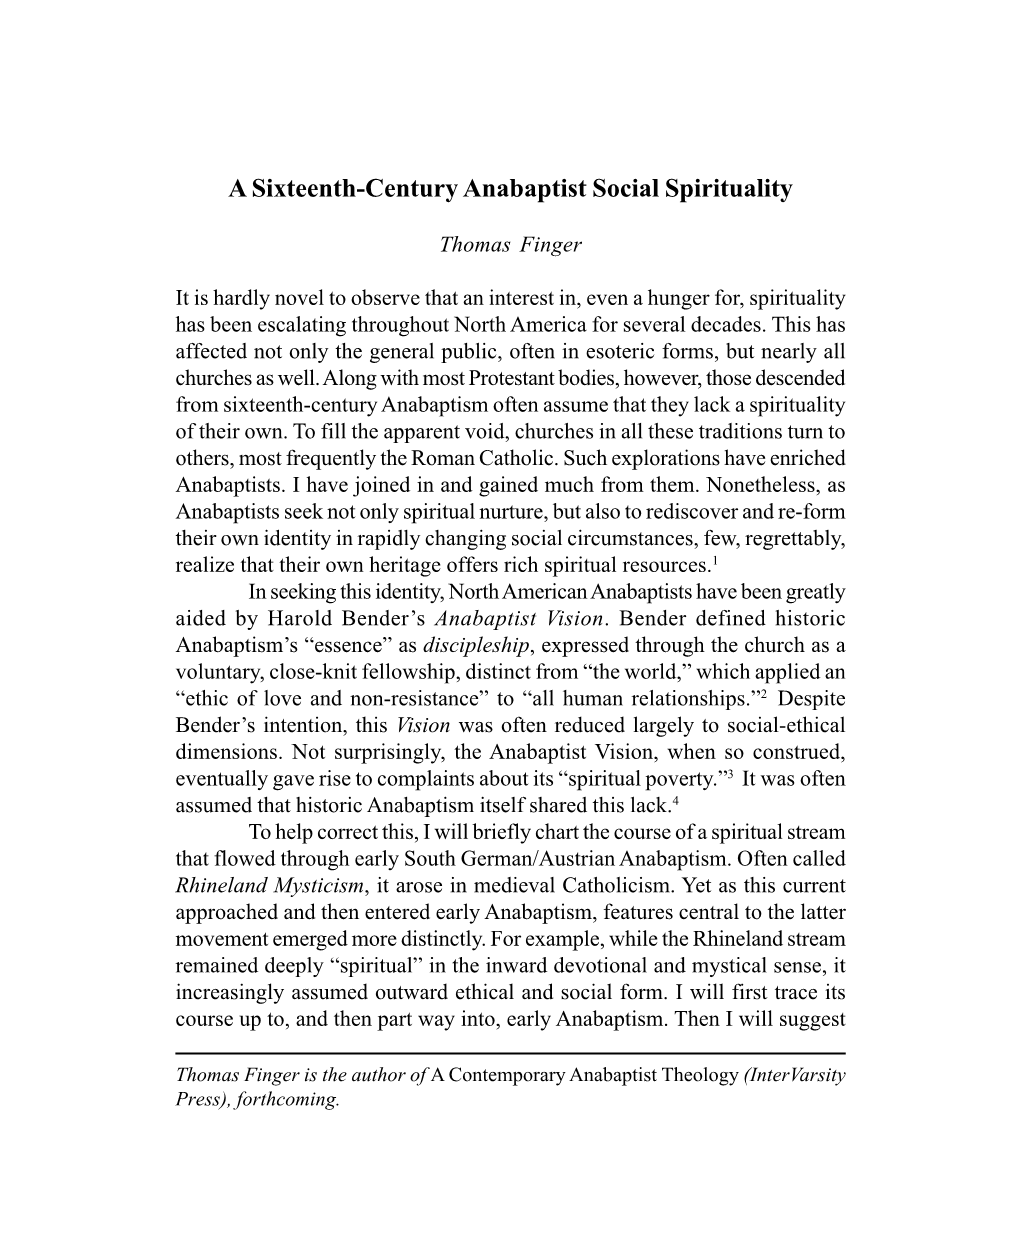 A Sixteenth-Century Anabaptist Social Spirituality (The Conrad Grebel Review, Fall 2004)